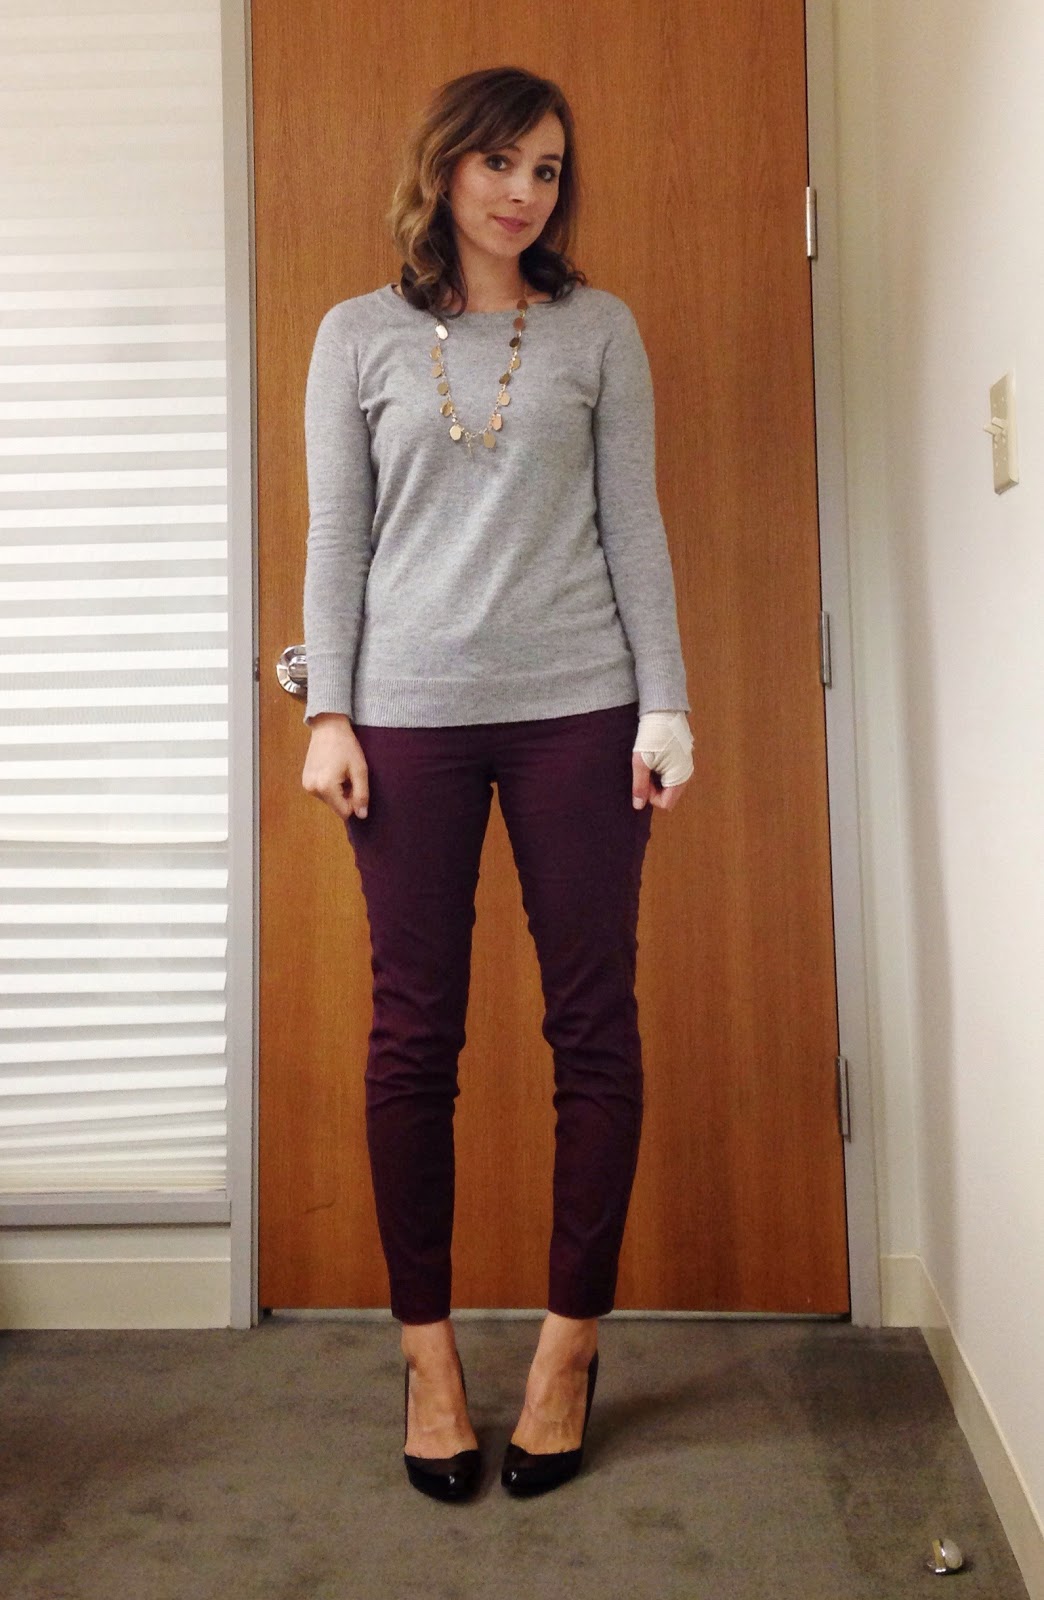 Nine-Thirty to Five: Maroon Pants and a Bandage